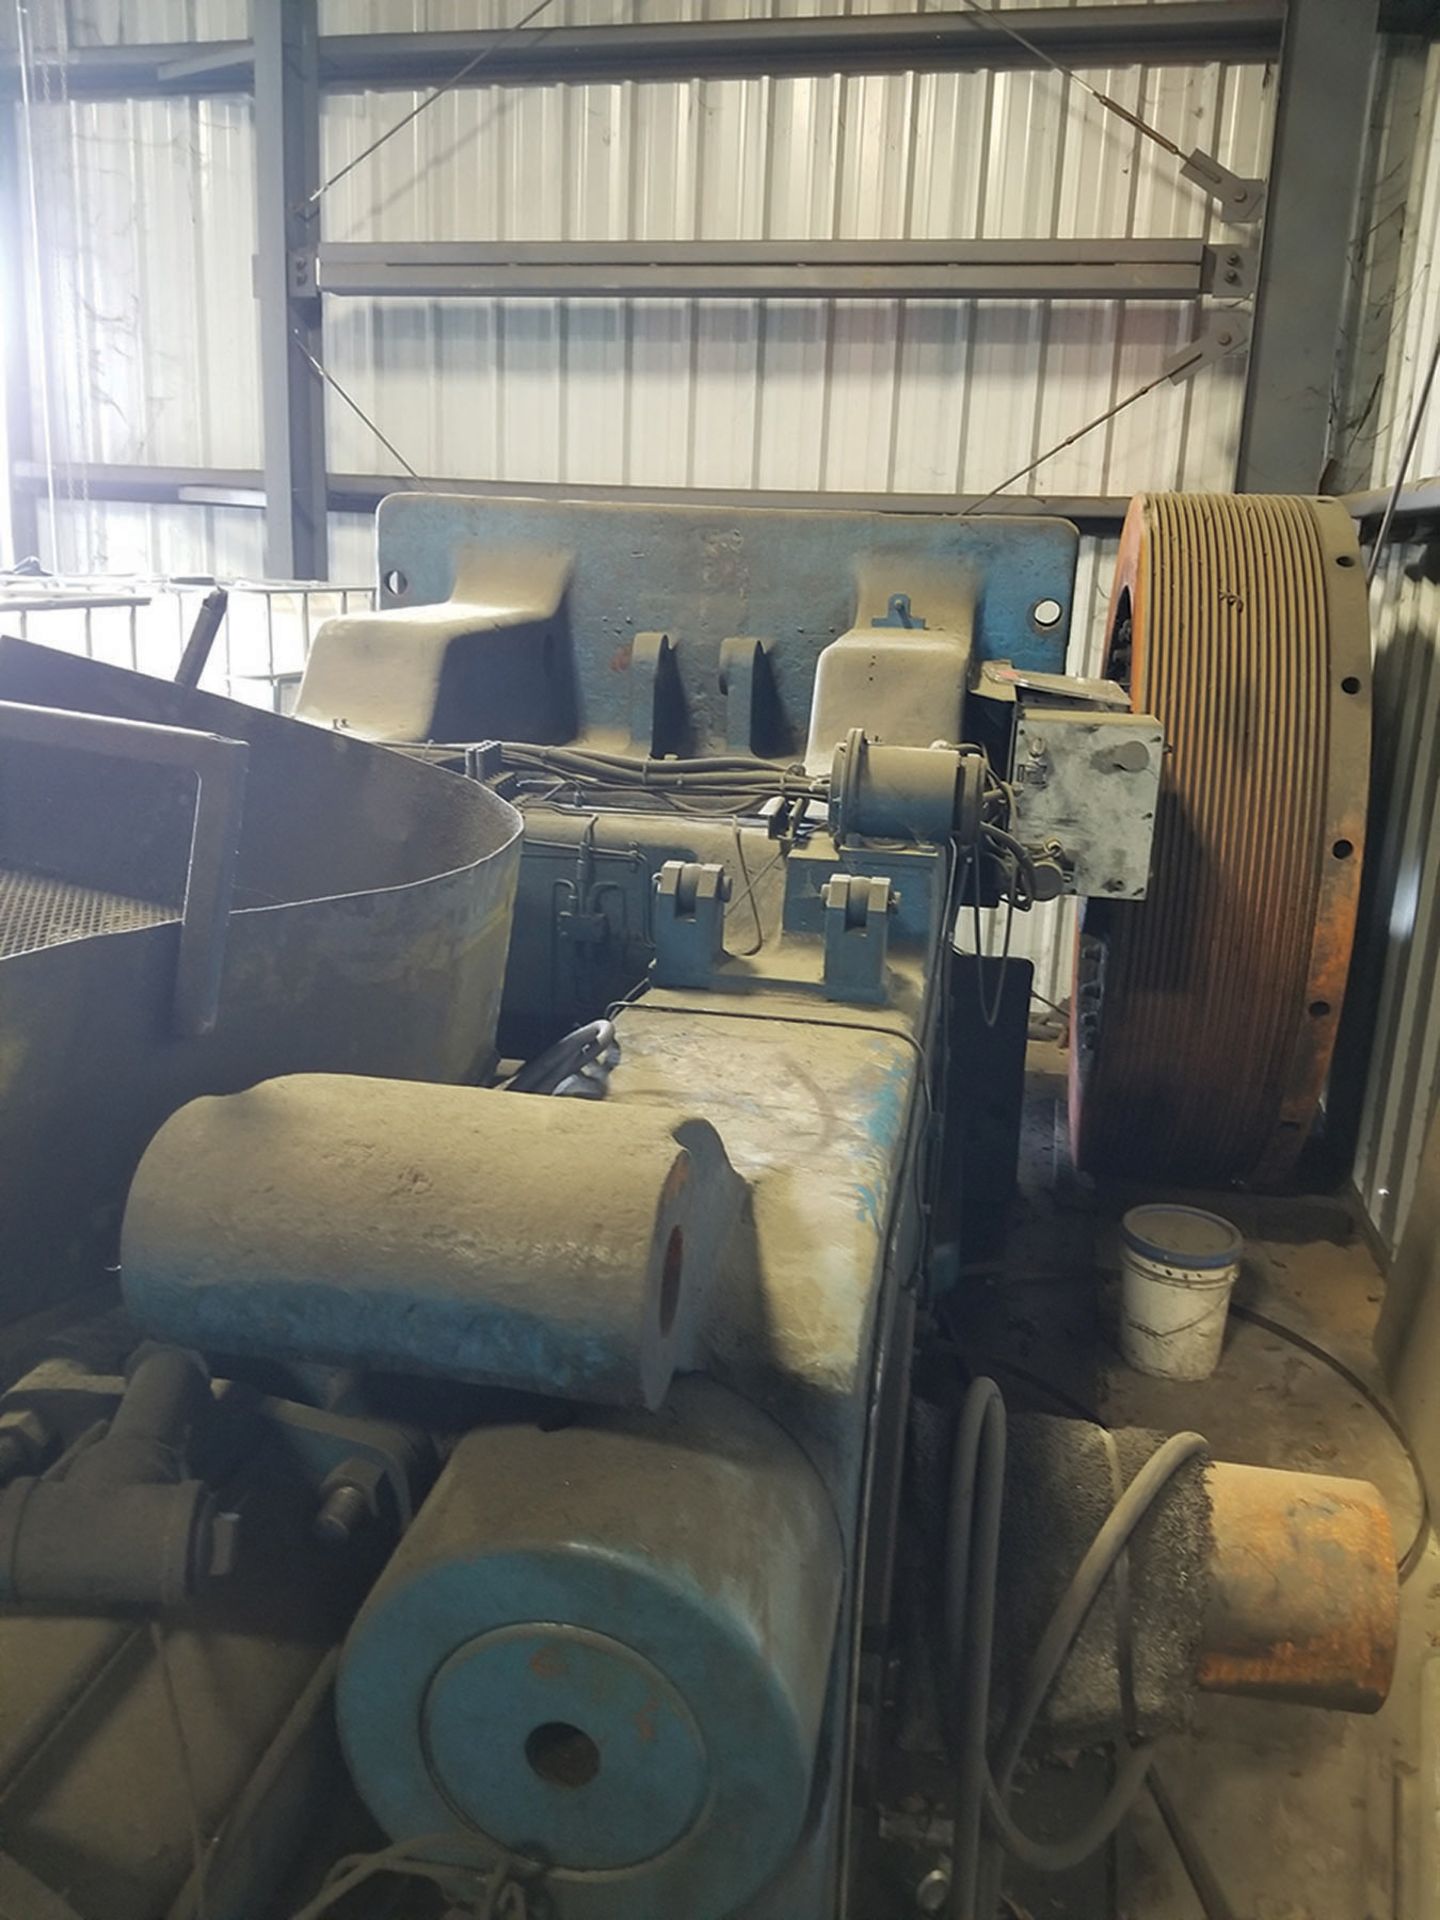 NATIONAL 1300-TON PRESS, REMOVED FROM SERVICE, NEW FLYWHEEL, S/N 21153 ***$5,500.00 RIGGING FEE***